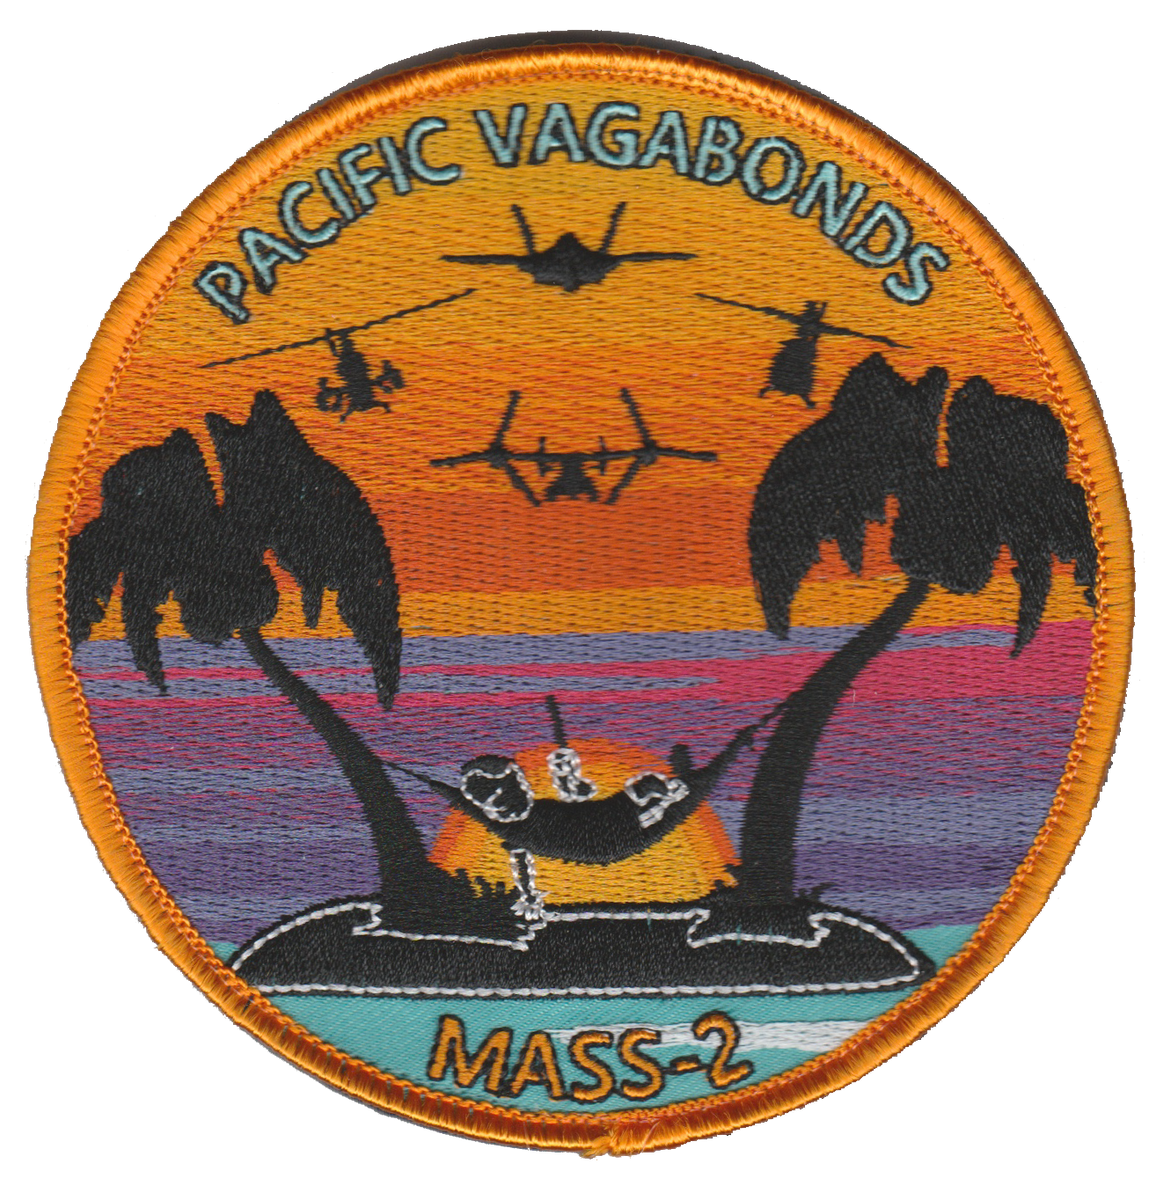 Official MASS-2 Pacific Vagabonds Japan Patch - with Hook and Loop